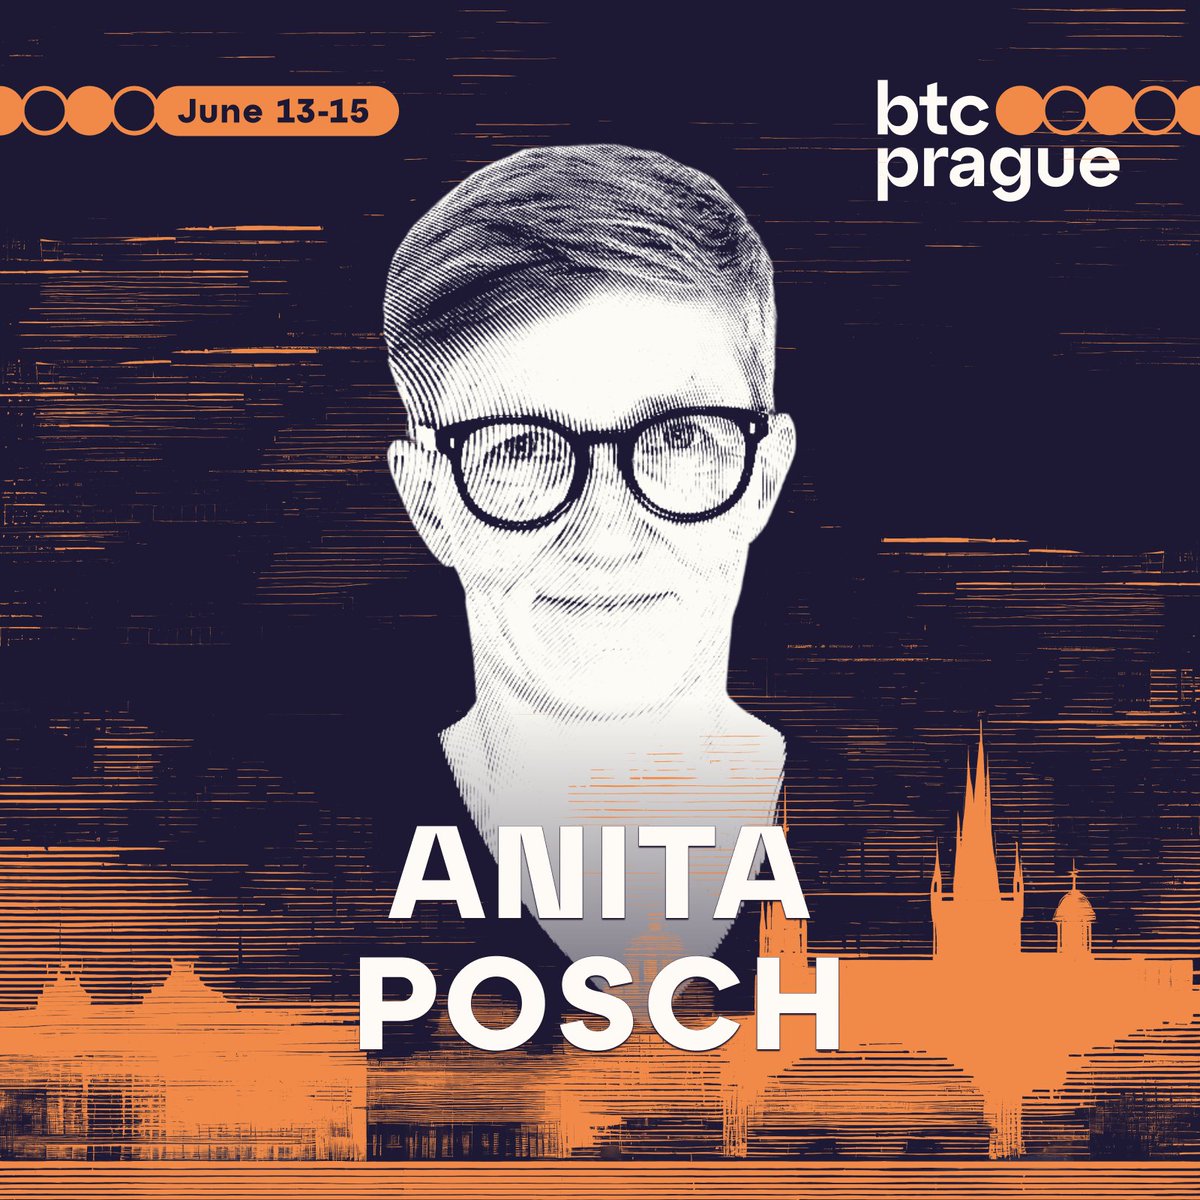 Promoting bitcoin as a tool for financial freedom and inclusivity🤗 @AnitaPosch is a bitcoin educator, author, and founder of @cracktheorange & @BFFbtc. She is focused on #bitcoin adoption in the Global South through education about money, digital privacy and self-sovereignty.